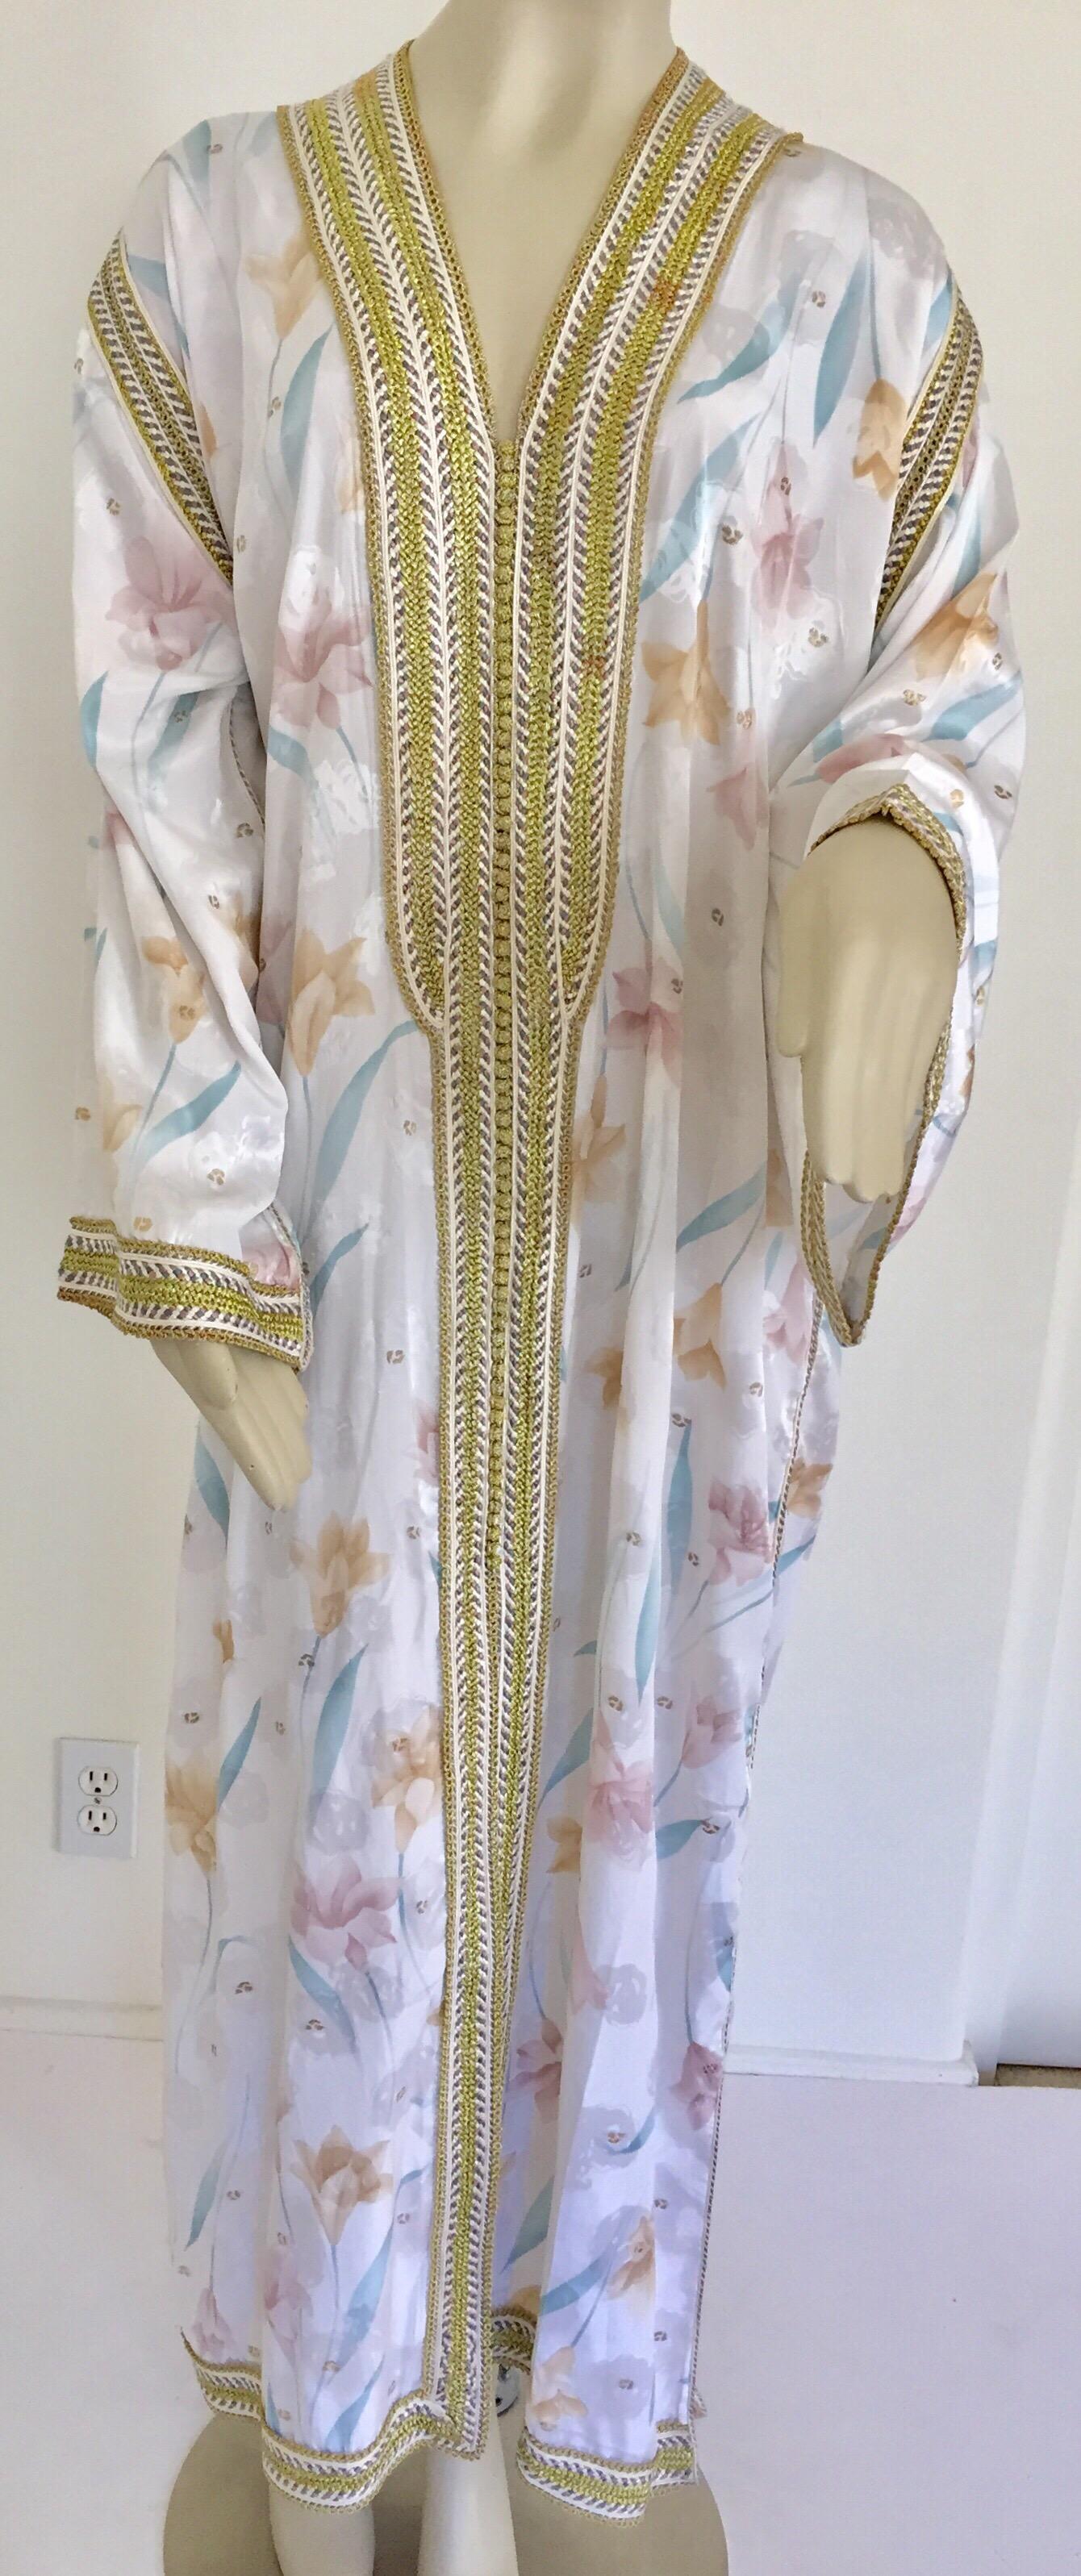 Moroccan Floral White Kaftan Maxi Dress Caftan Size Large - 1 In Good Condition For Sale In North Hollywood, CA